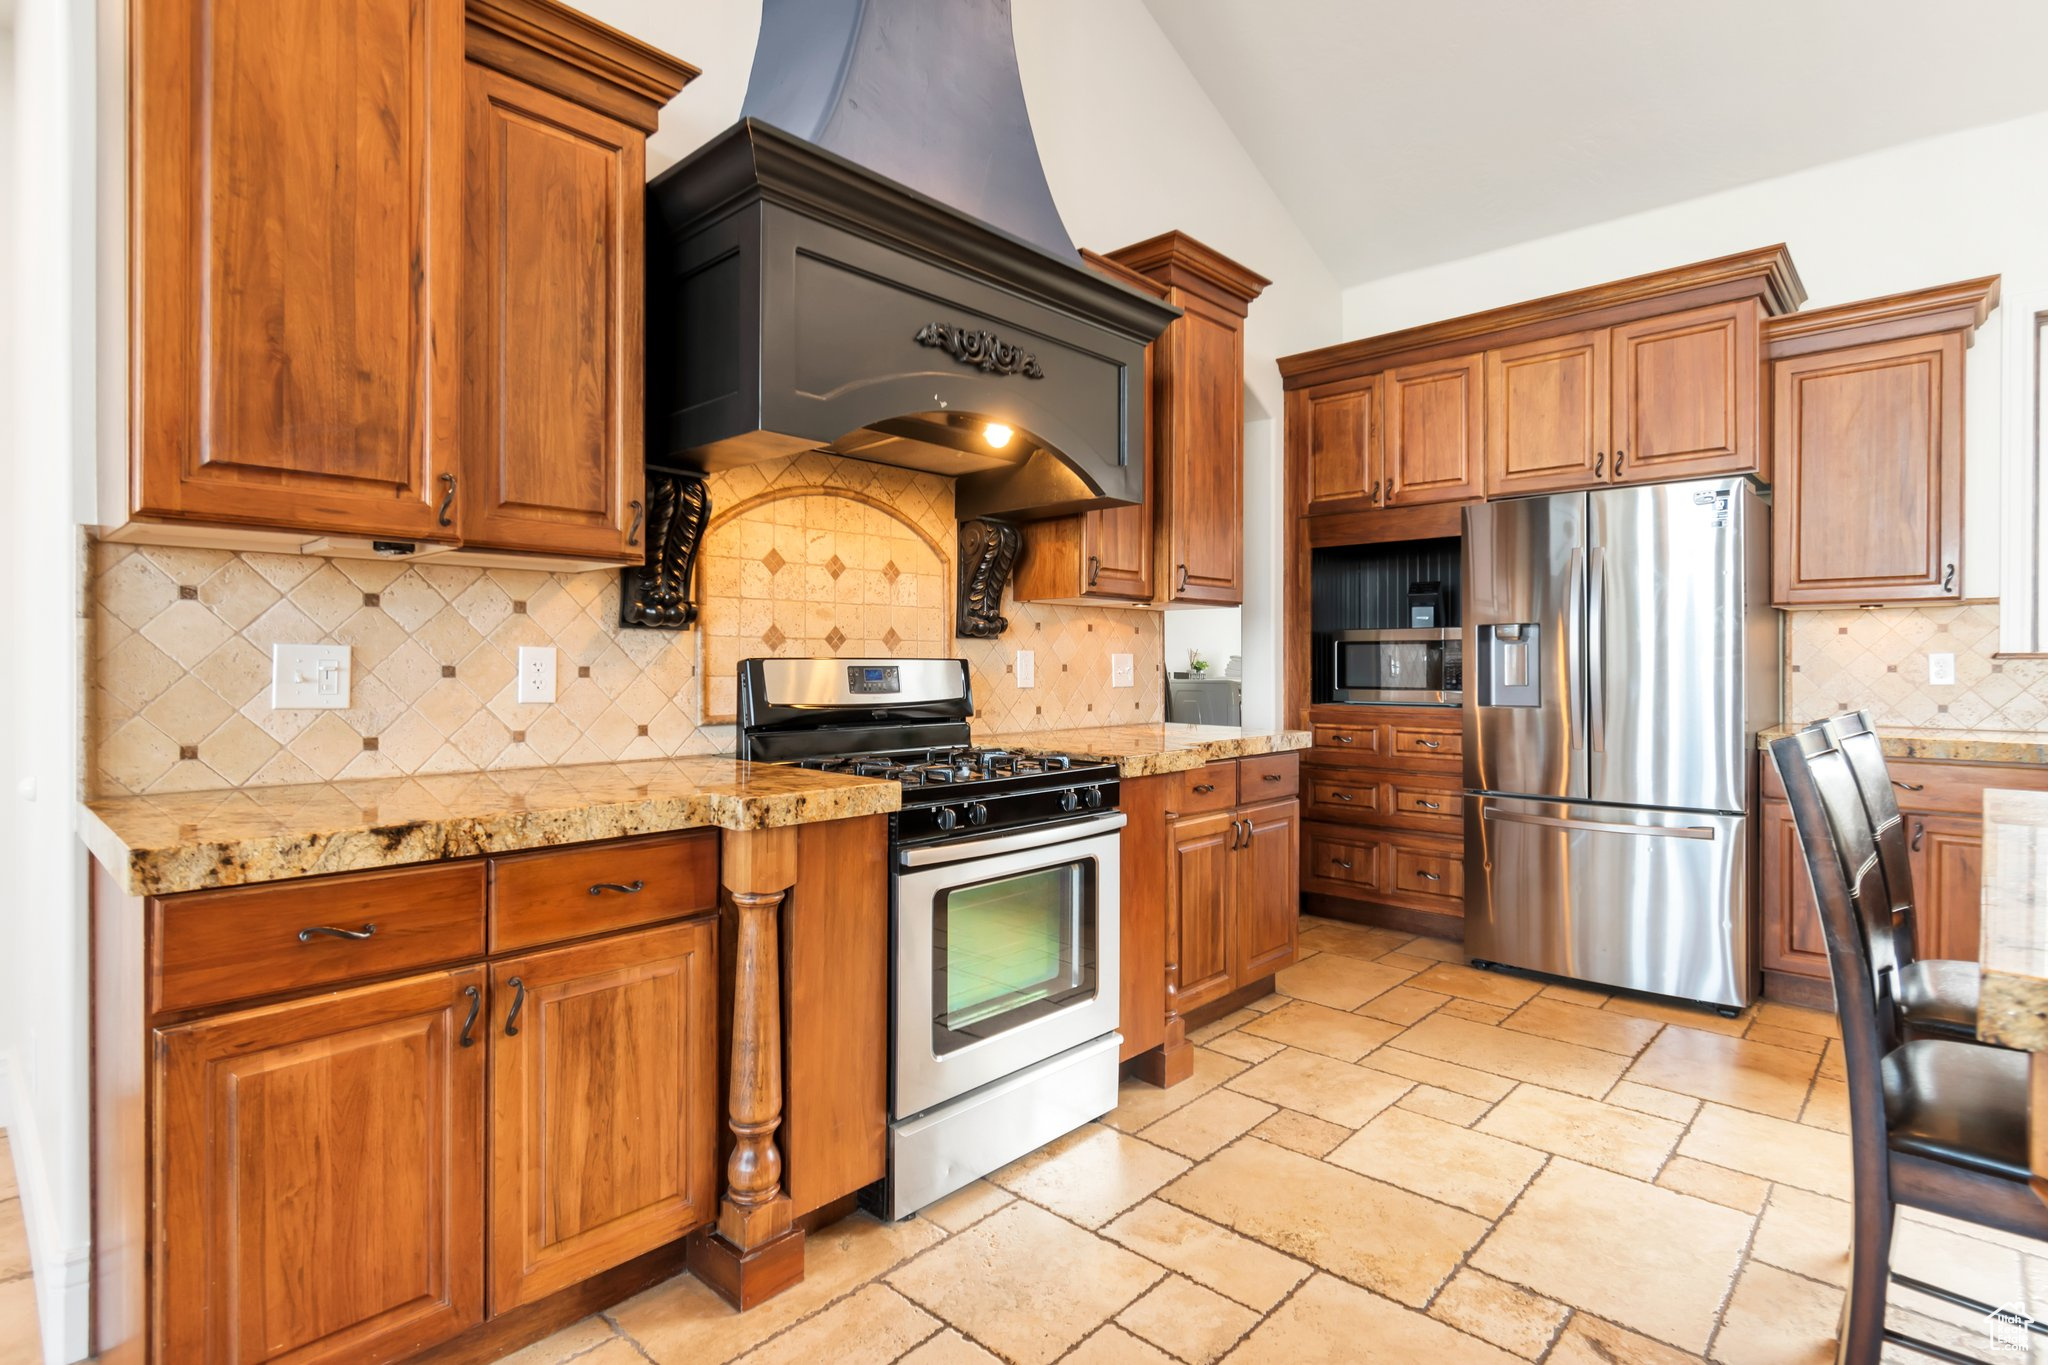 Kitchen featuring backsplash, stainless steel appliances, lofted ceiling, light stone counters, and light tile floors